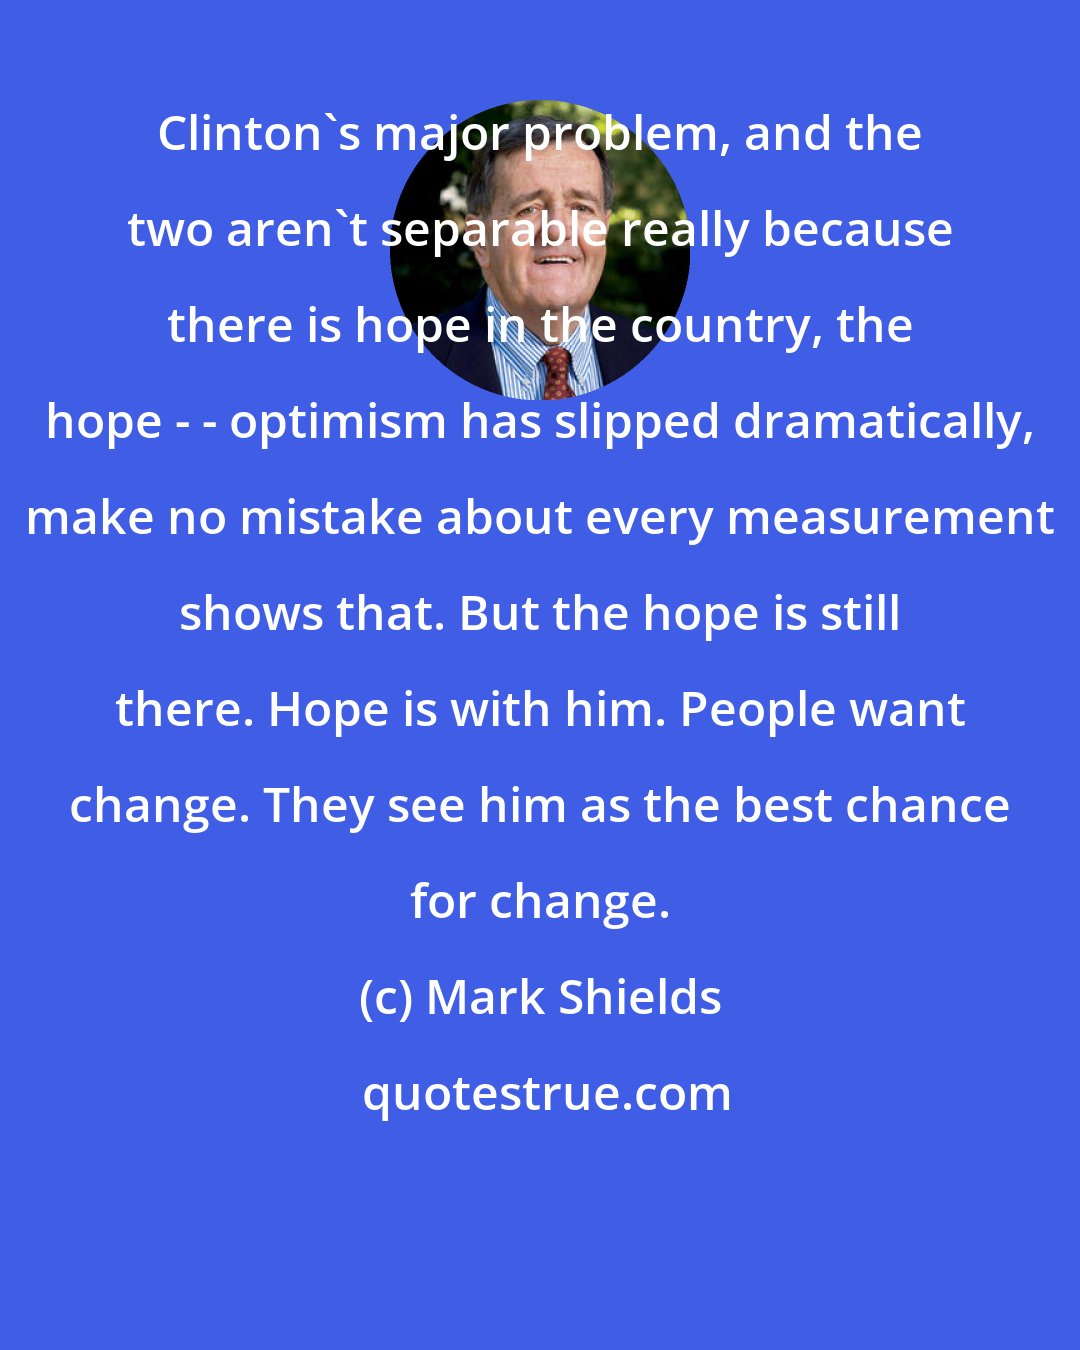 Mark Shields: Clinton's major problem, and the two aren't separable really because there is hope in the country, the hope - - optimism has slipped dramatically, make no mistake about every measurement shows that. But the hope is still there. Hope is with him. People want change. They see him as the best chance for change.